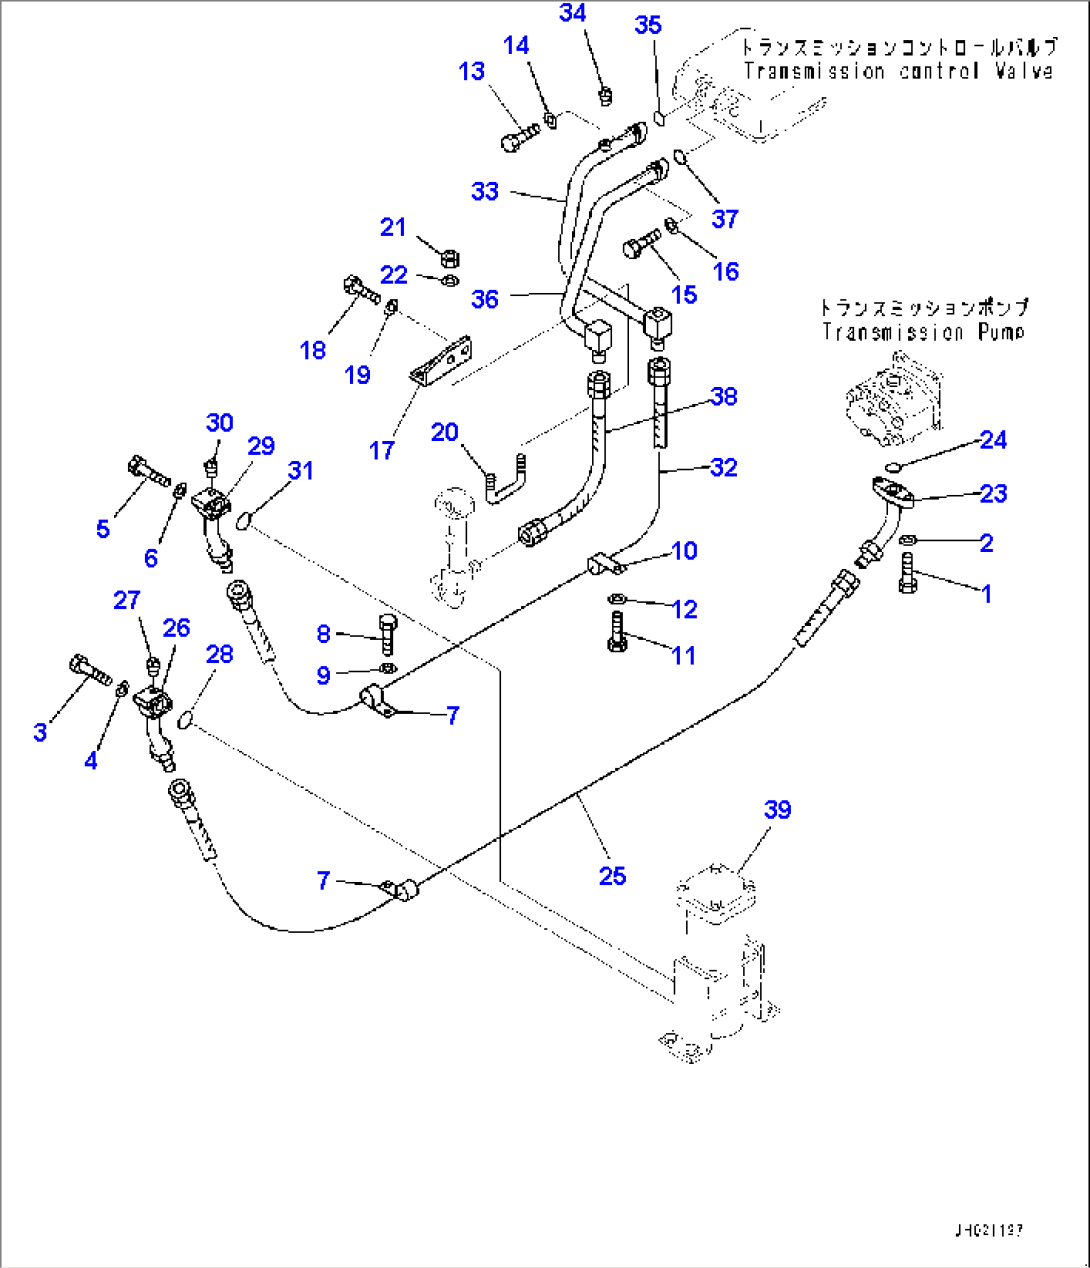 Power Train Piping, Torque Flow Piping (#15512-)